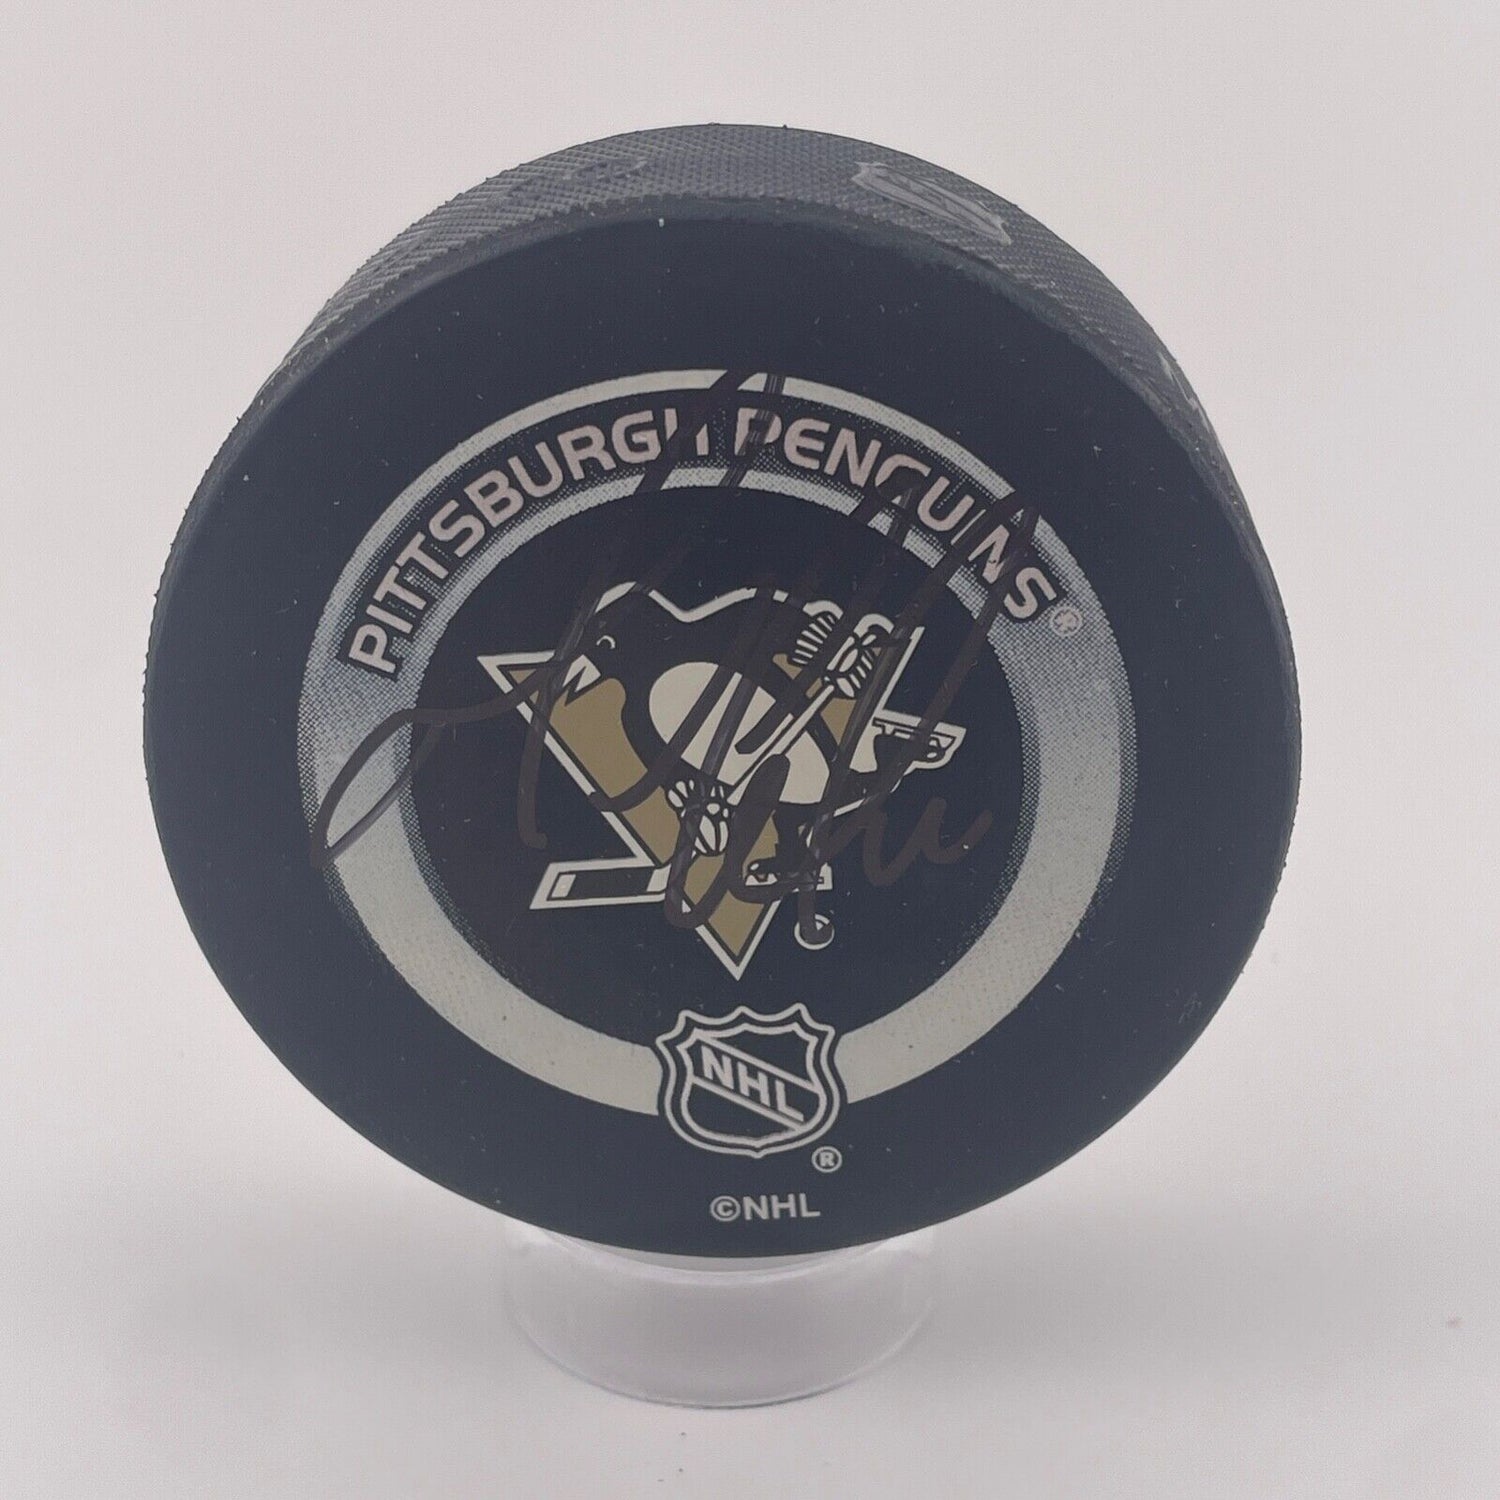 Mario Lemieux Twice Signed Hockey Puck. Front + Back. Comes in Original Box. JSA